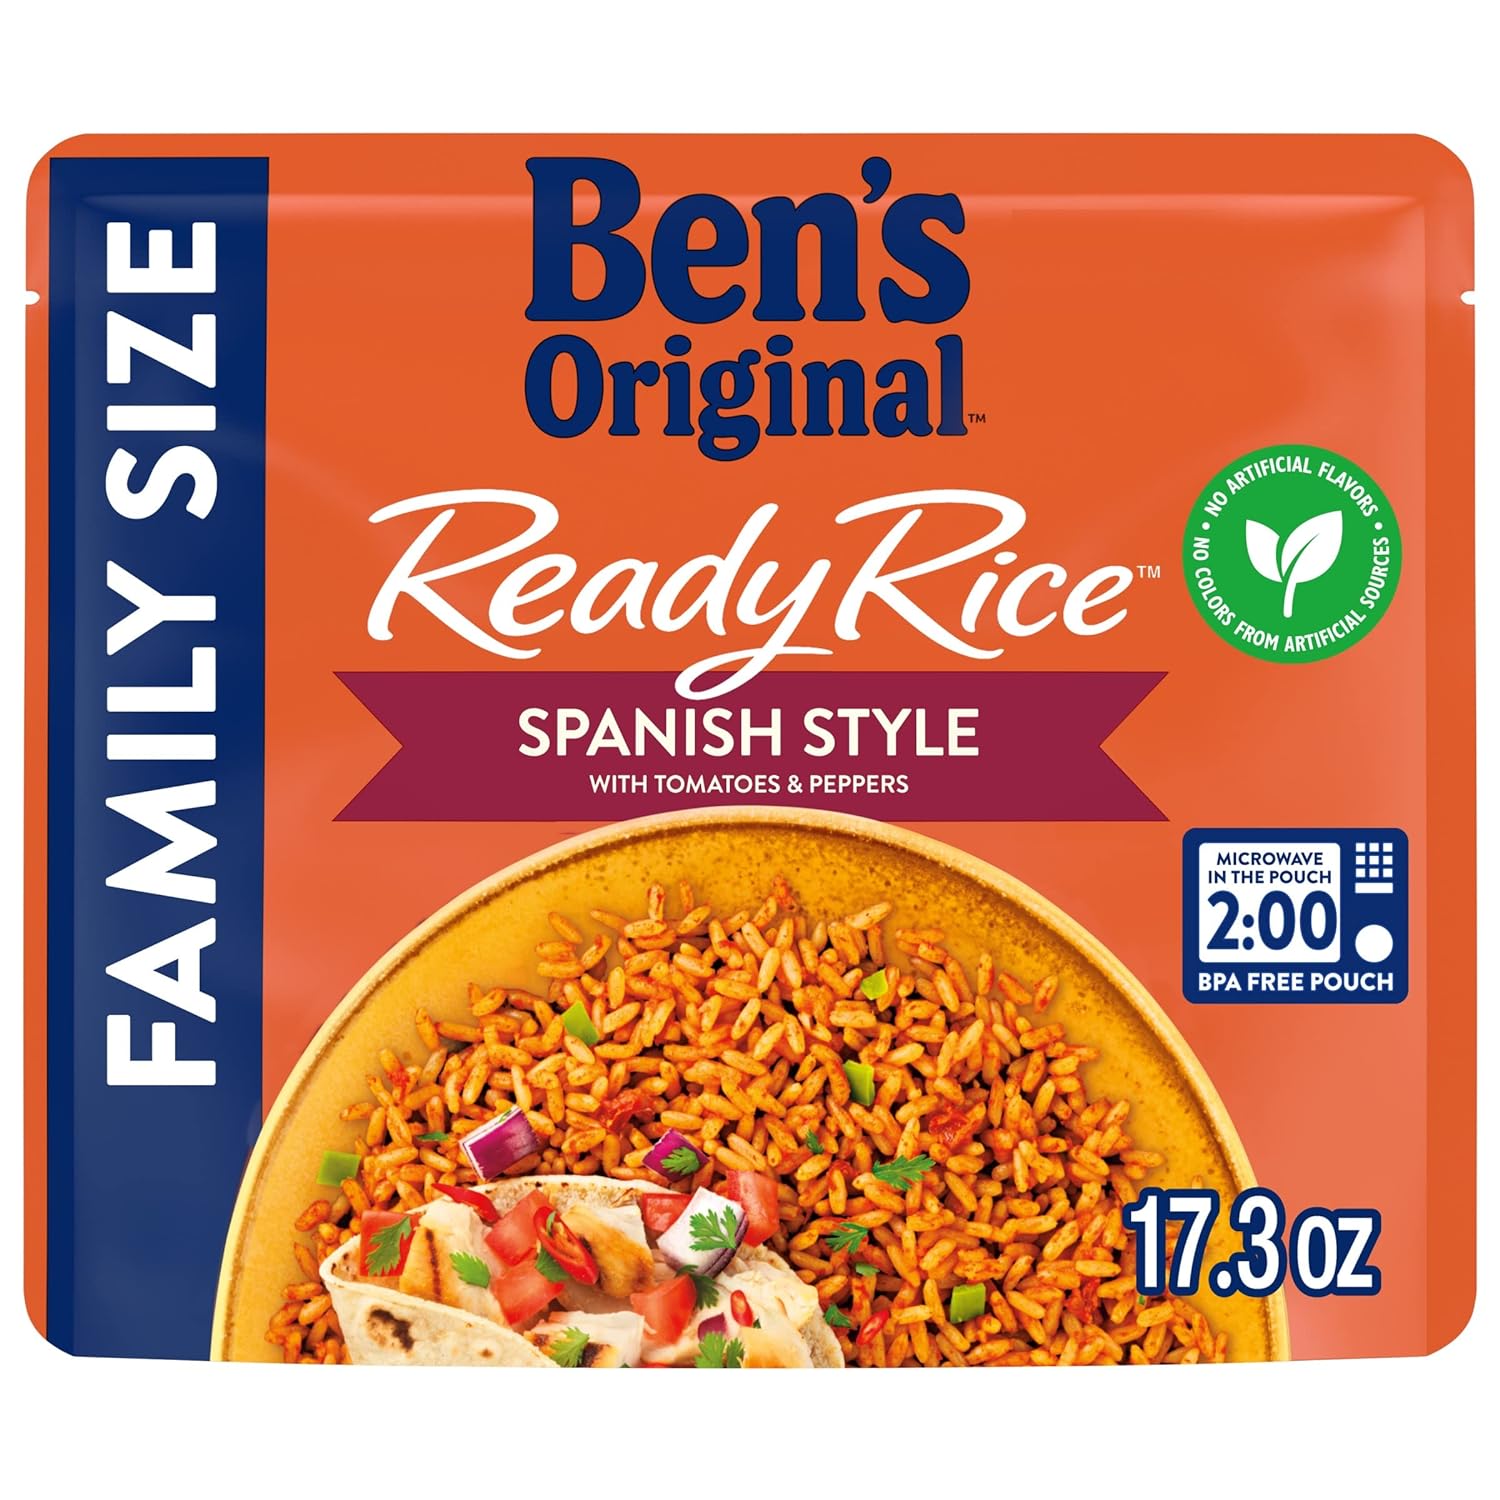 BEN'S ORIGINAL READY RICE Spanish Style Flavored Rice, Family Size, Easy Dinner Side, 17.3 OZ Pouch (Pack of 6)